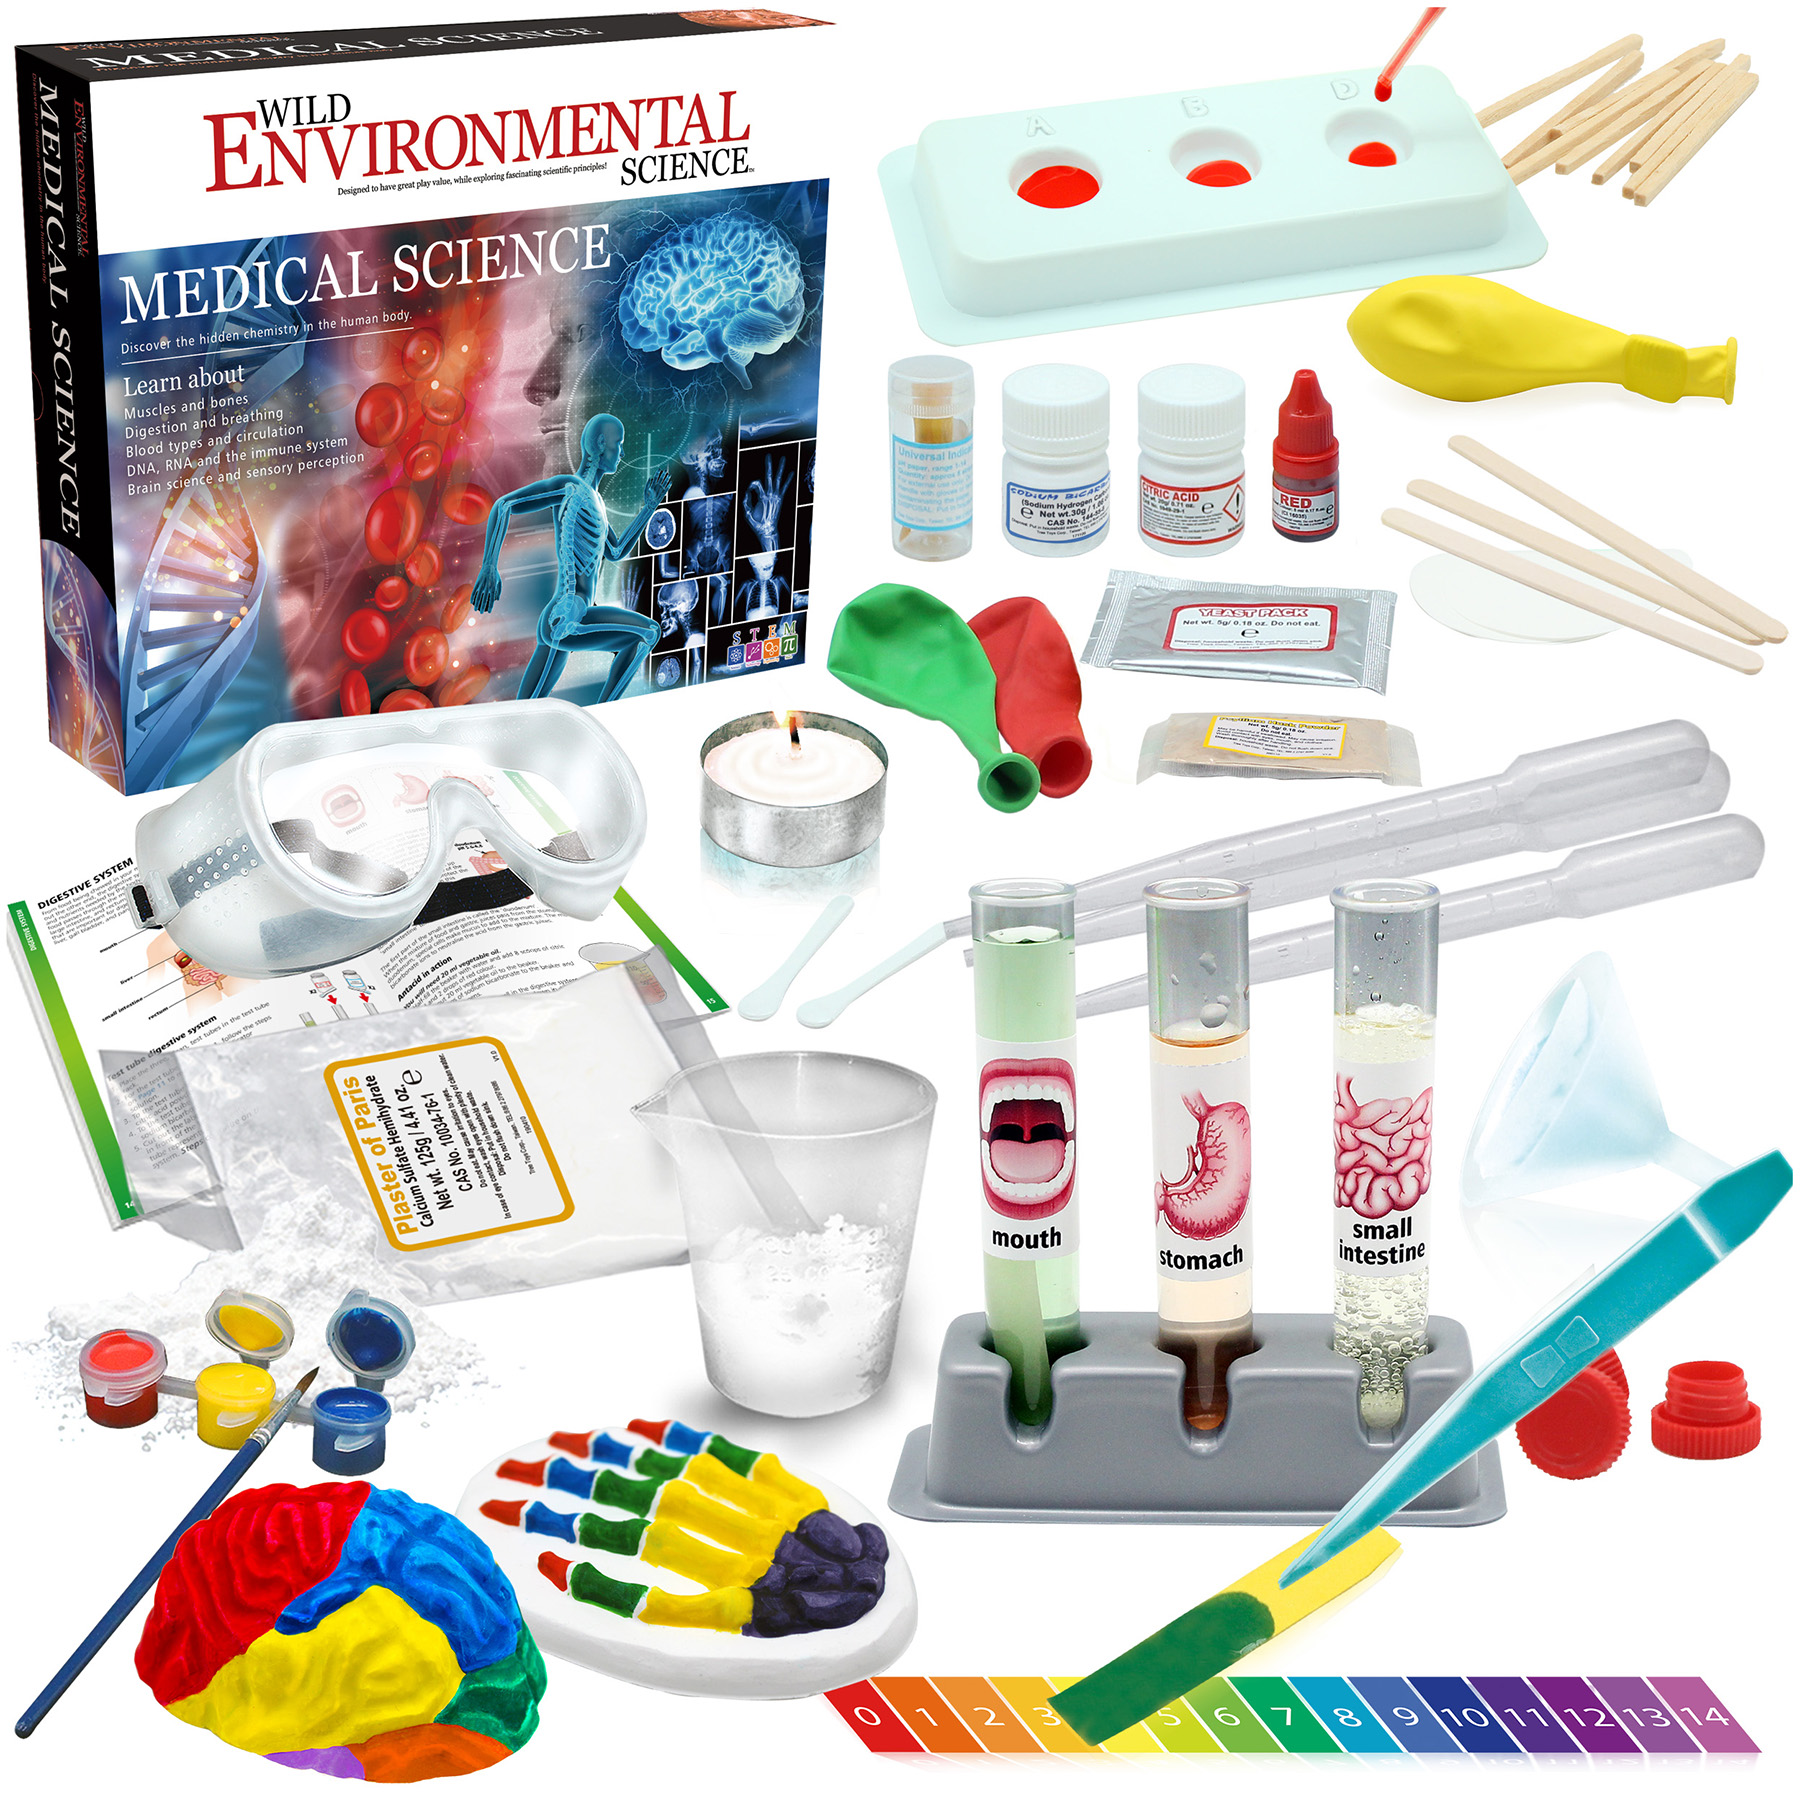 WILD ENVIRONMENTAL SCIENCE Medical Science - STEM Kit for Ages 8+ - Make a Test-Tube Digestive System, Extract DNA, Create Anatomical Models and More!